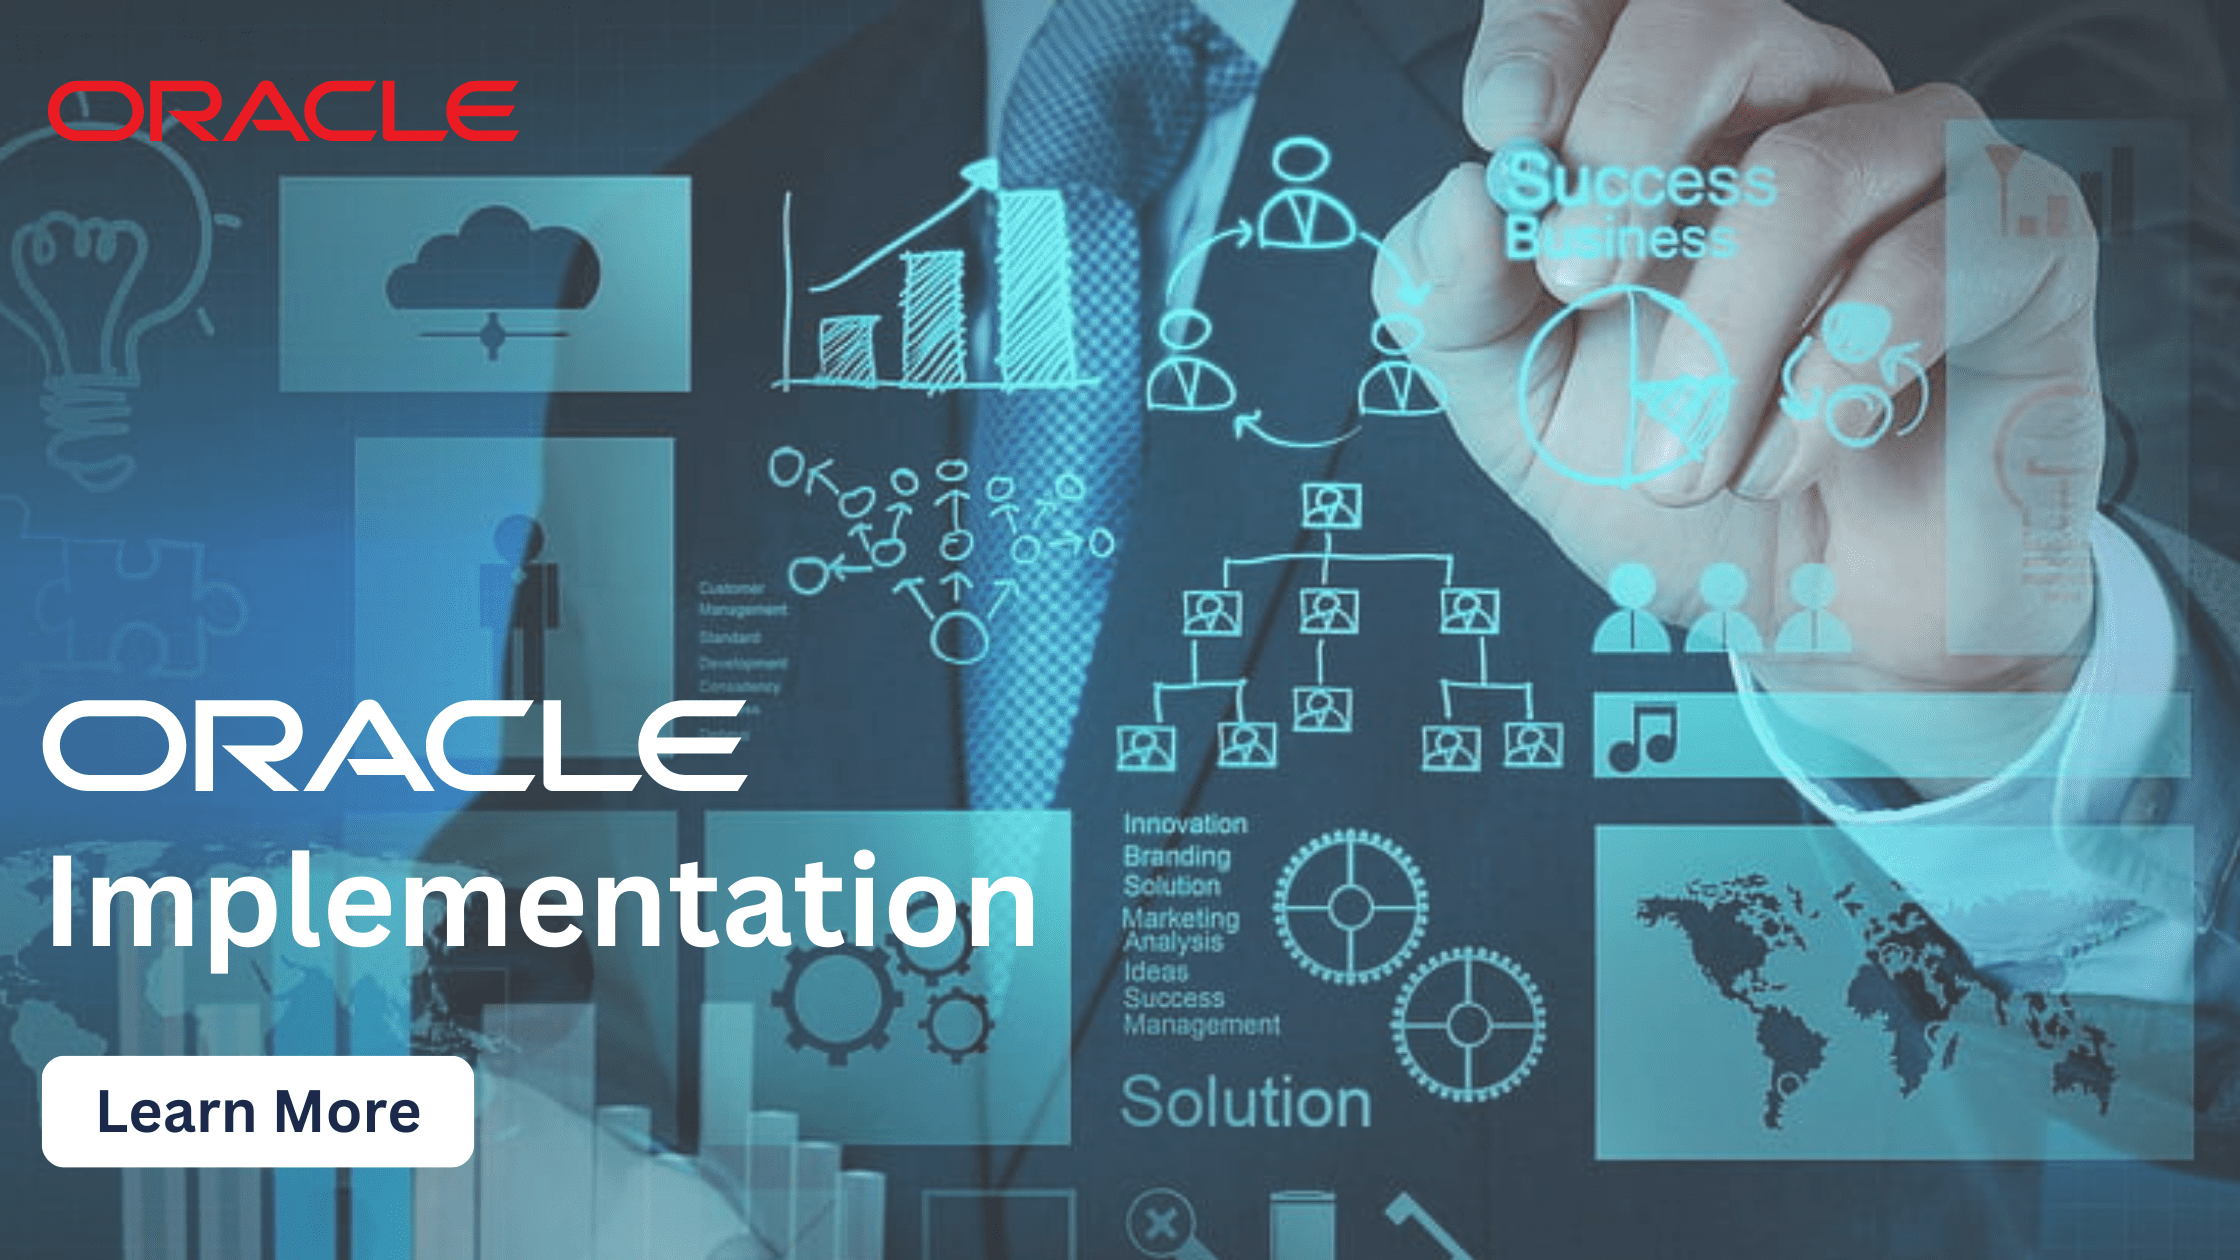 Success Stories: How Companies Achieved ROI with Oracle Implementation